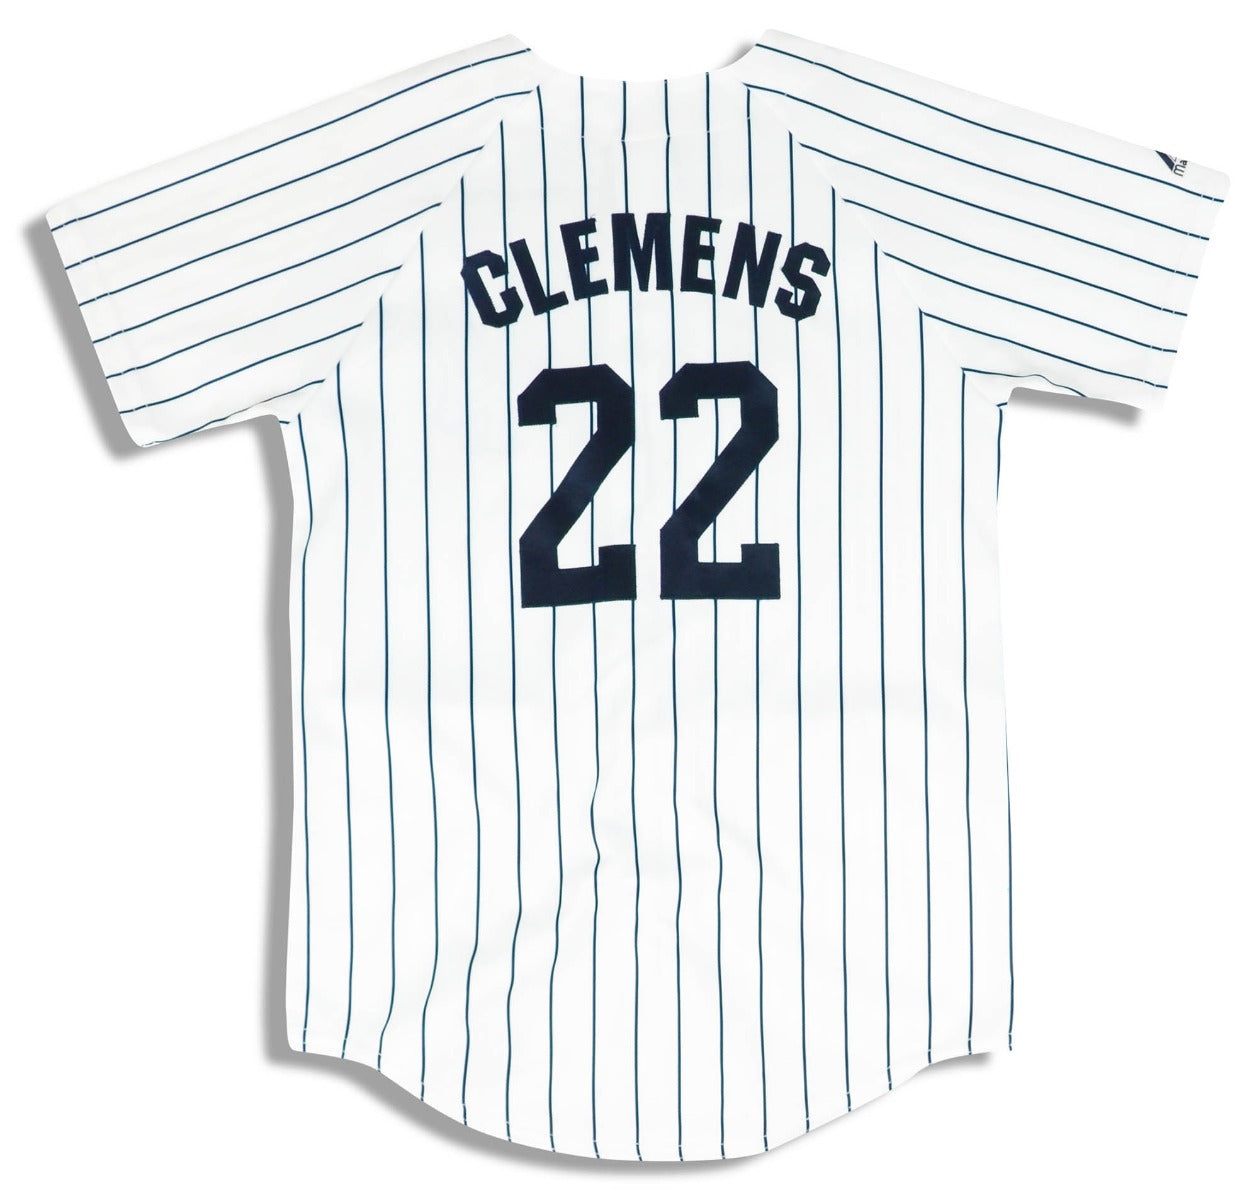 Roger Clemens Yankees PinStripe Jersey LE of 22 Stat Jersey